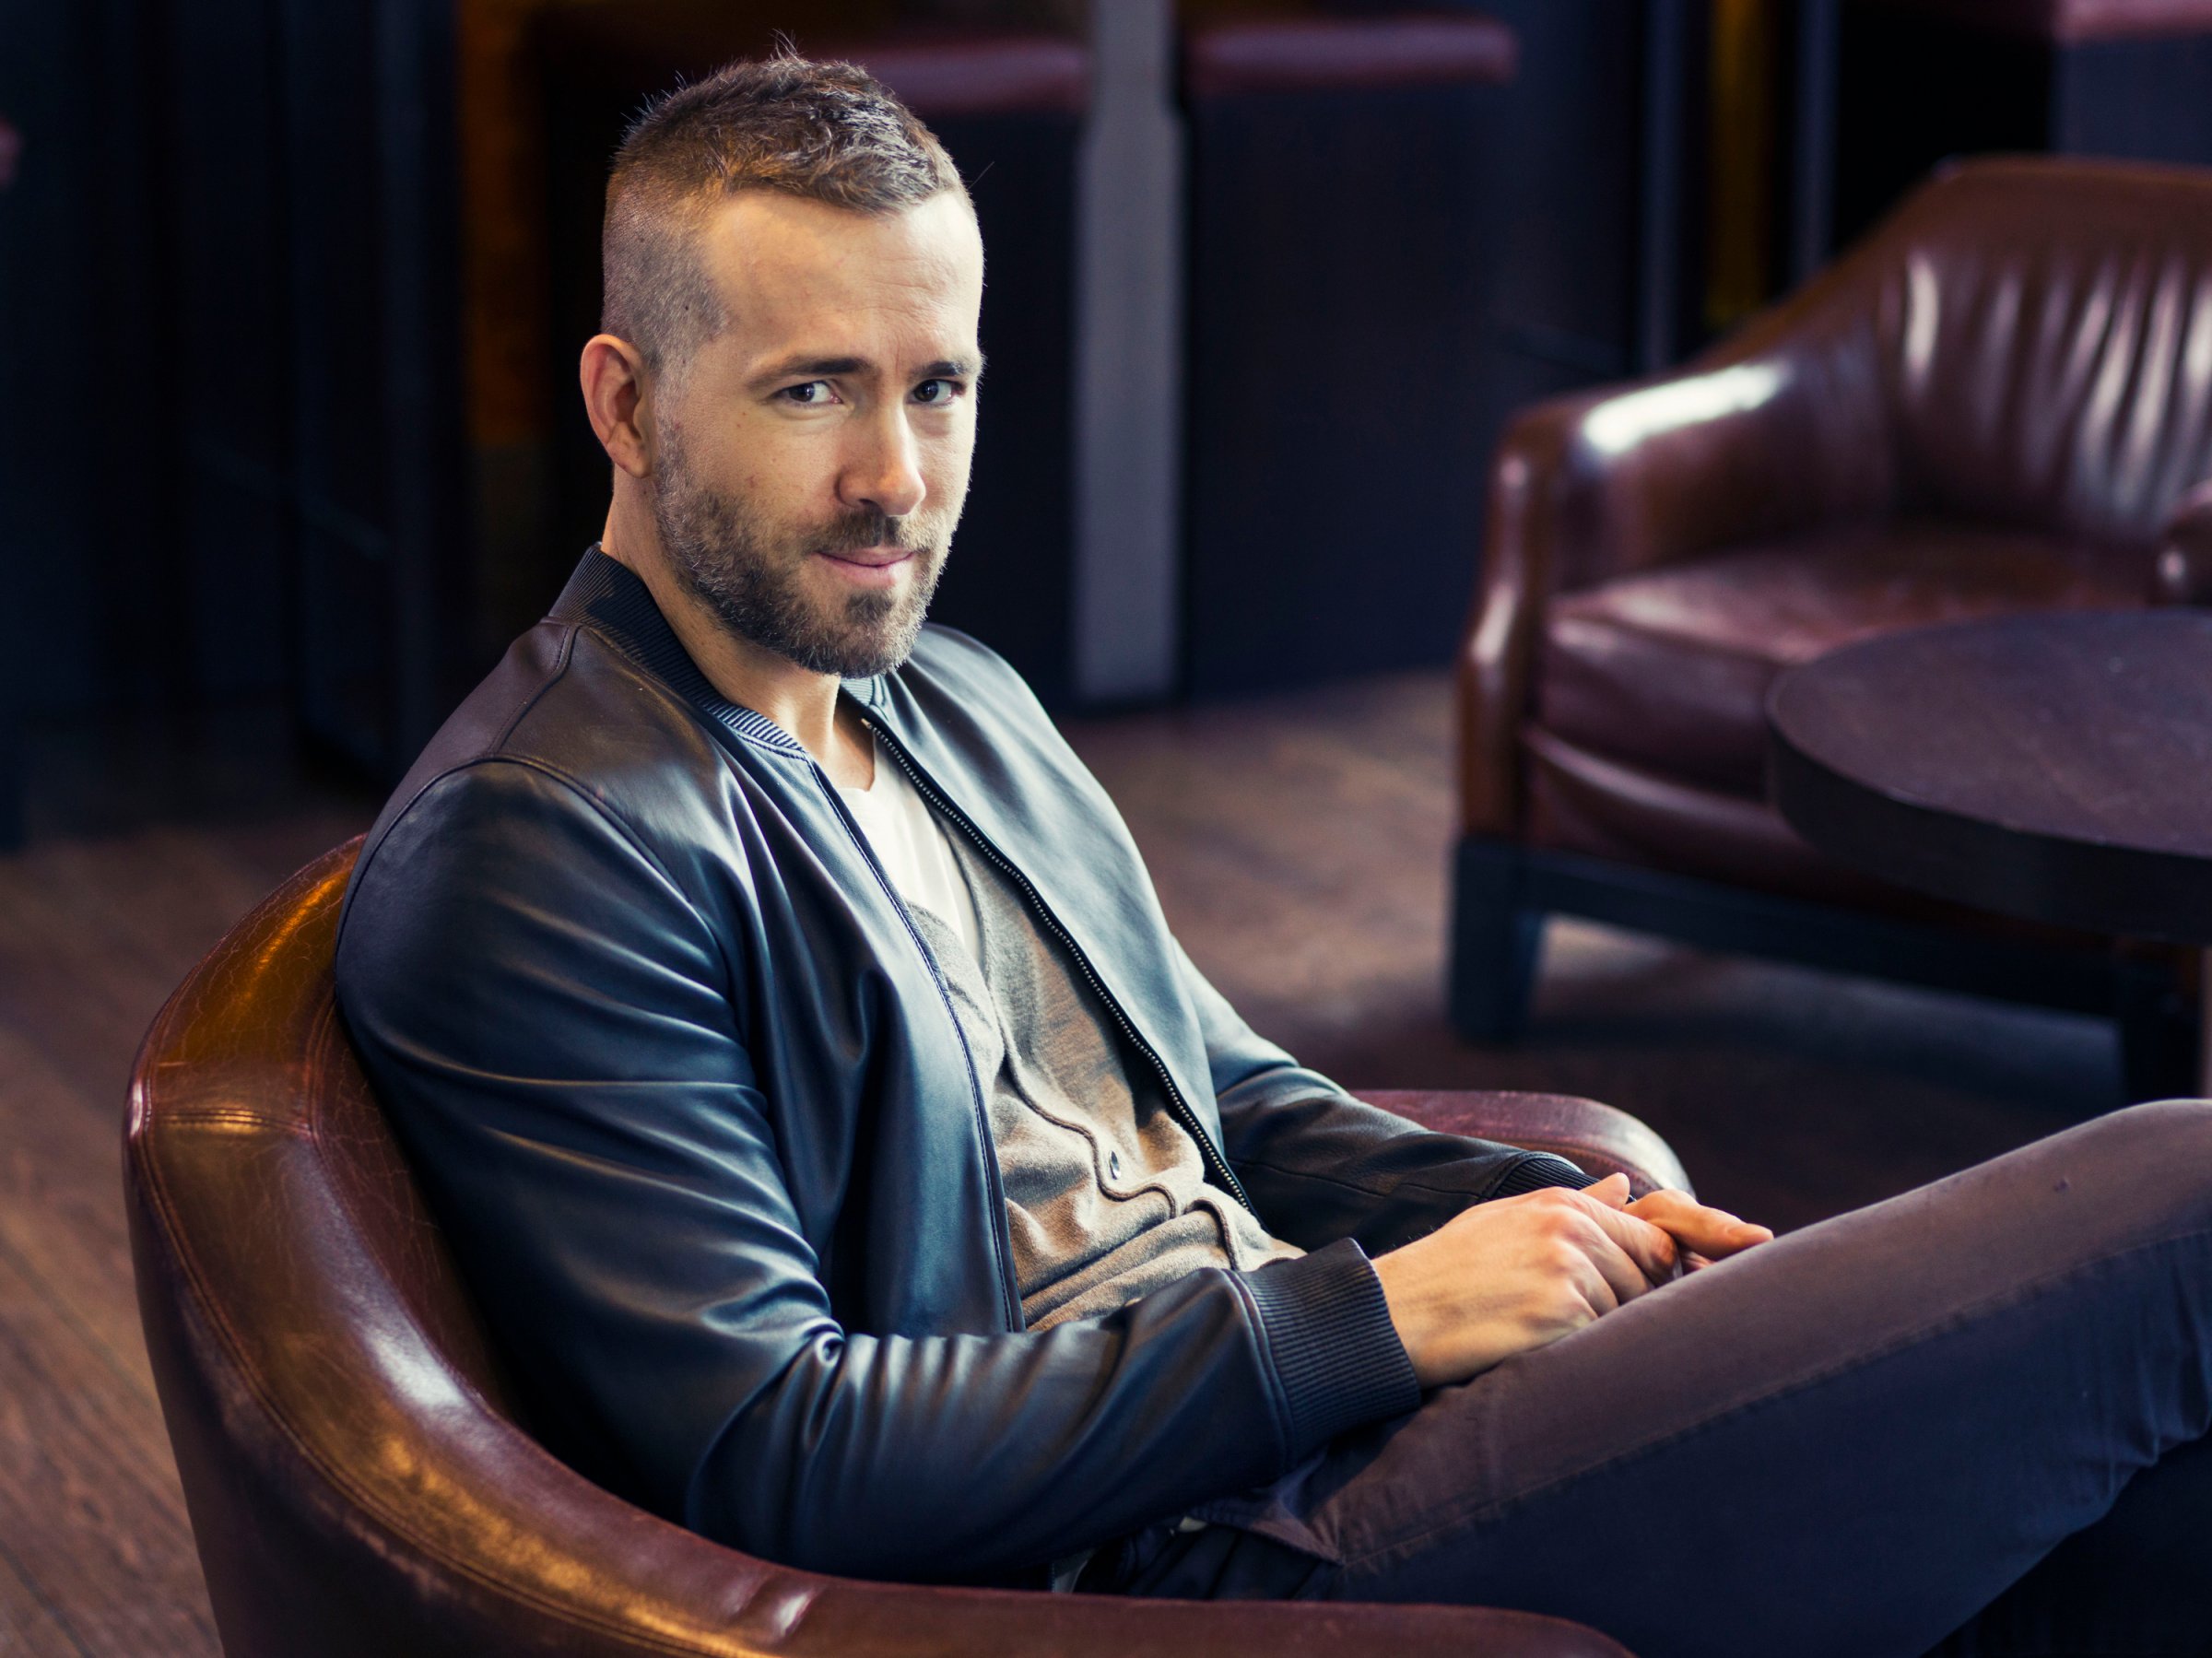 Canadian actor Ryan Reynolds poses for a portrait in promotion of his upcoming role in the film "Woman in Gold" on Feb. 26, 2015 in New York.